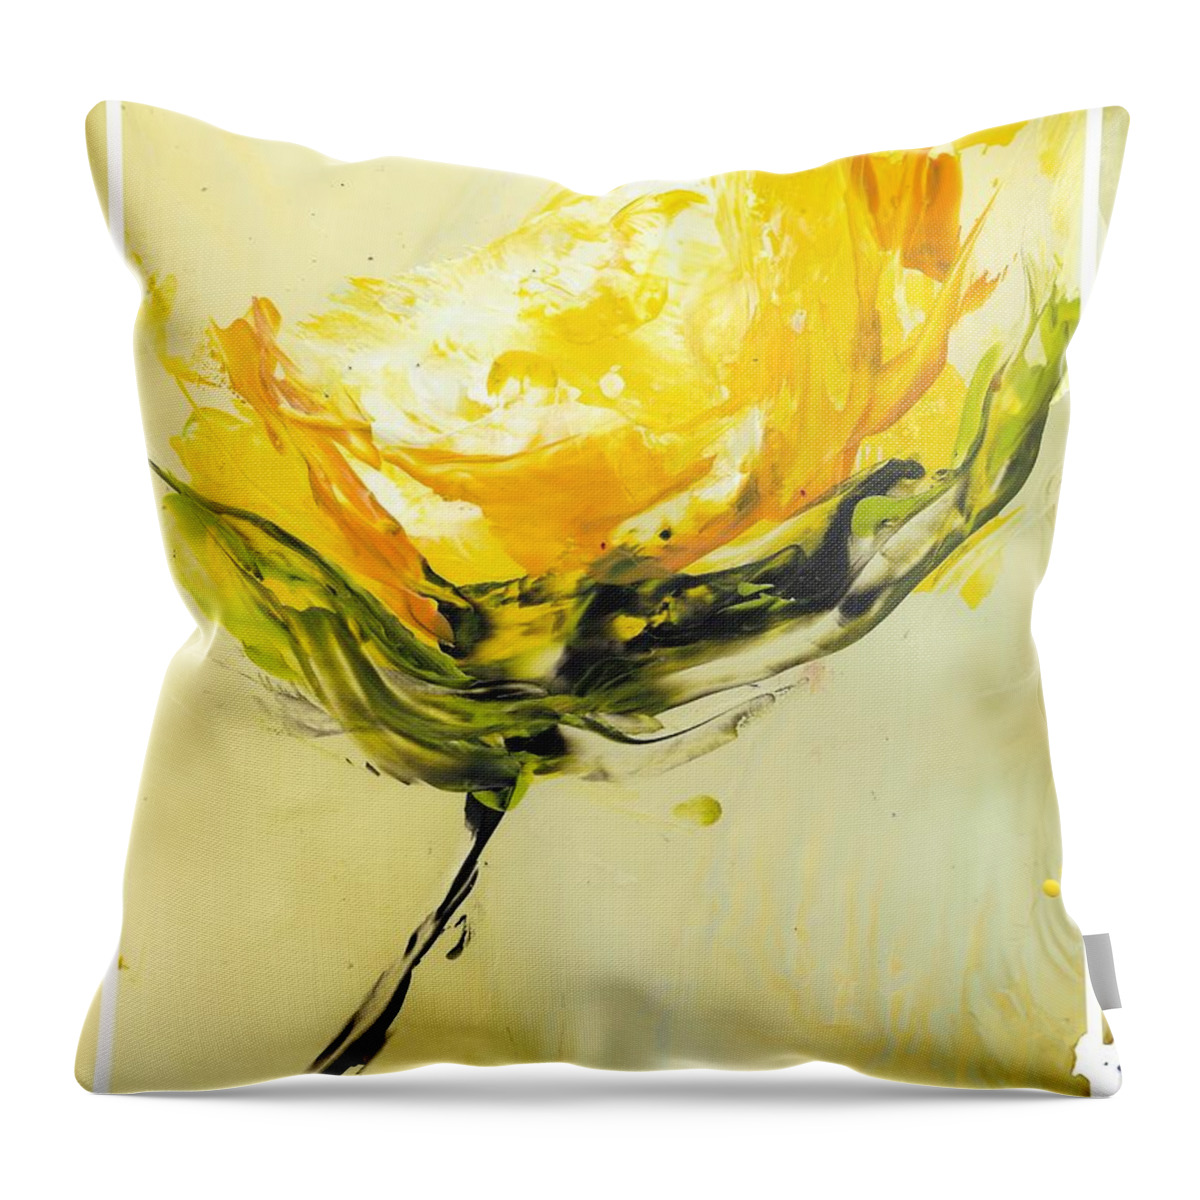 Yellow Throw Pillow featuring the painting Lemon Drop by Bonny Butler